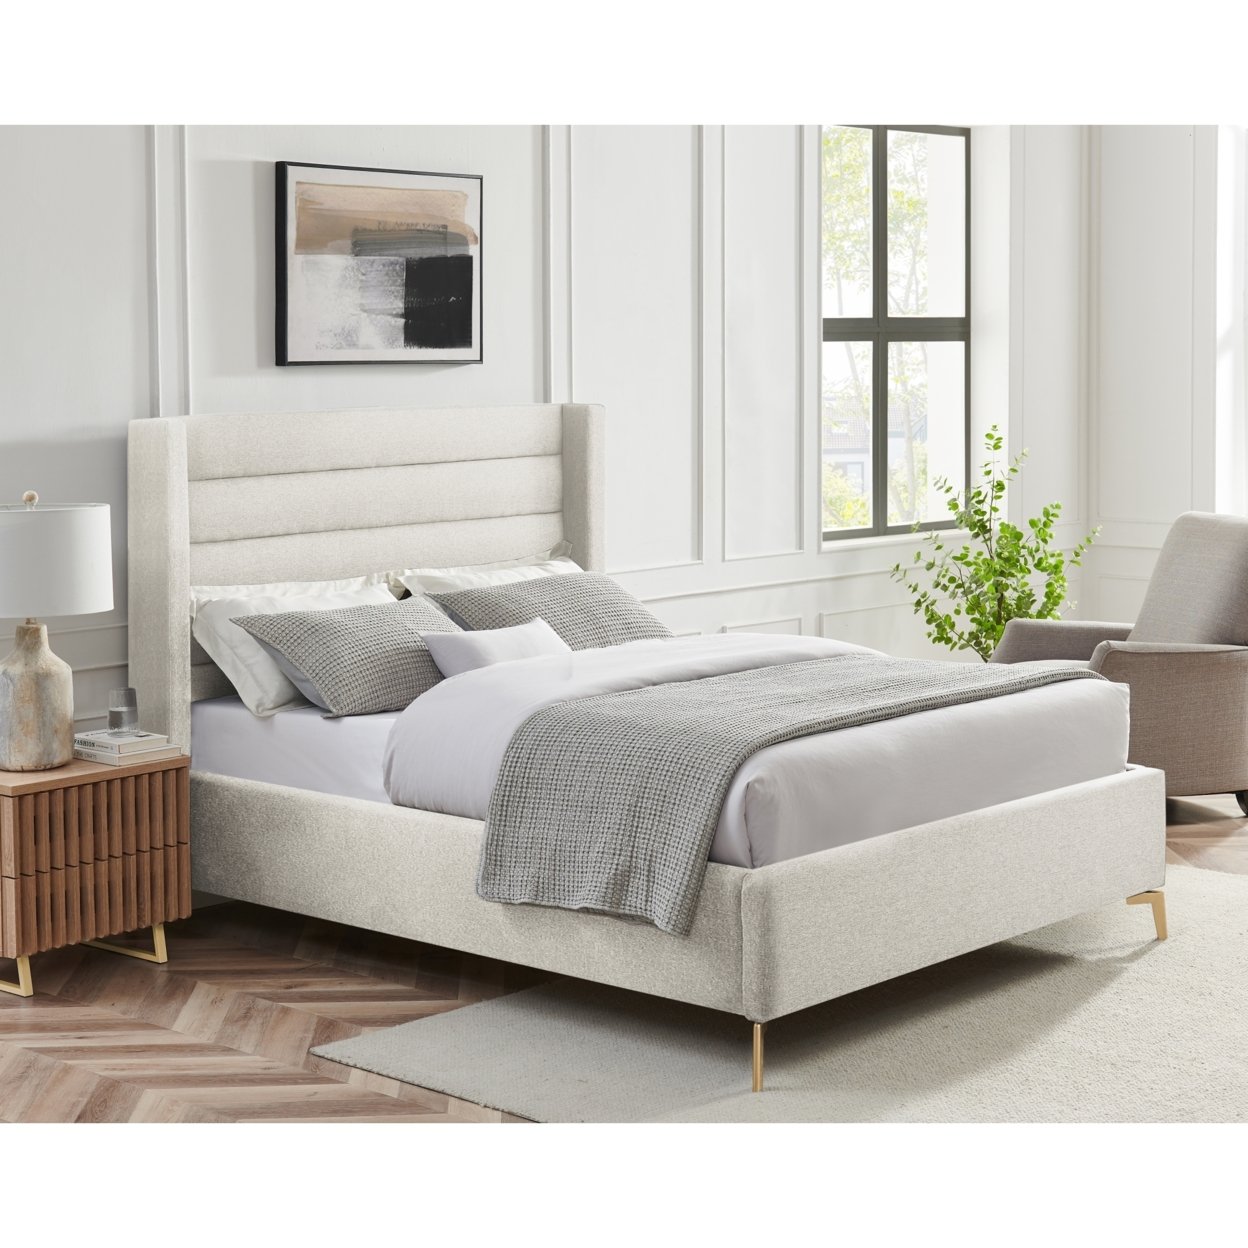 Rayce Bed - Linen Upholstered, Wingback Channel Tufted Headboard, Oblique Legs, Slats Included - Grey, King